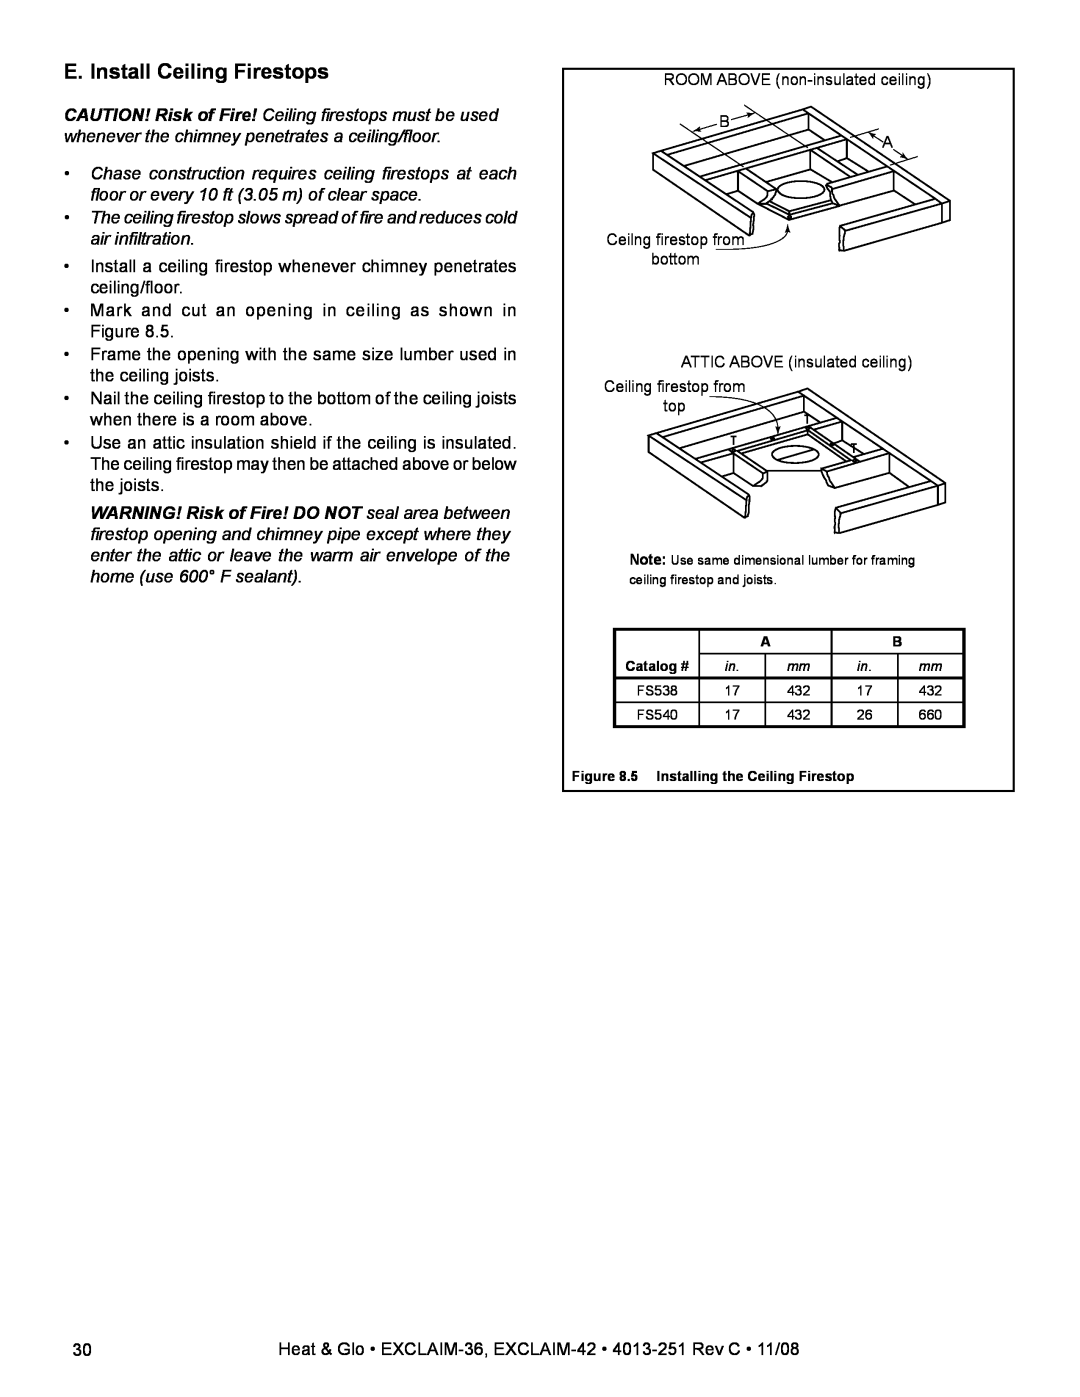 Hearth and Home Technologies EXCLAIM-36 owner manual E. Install Ceiling Firestops 